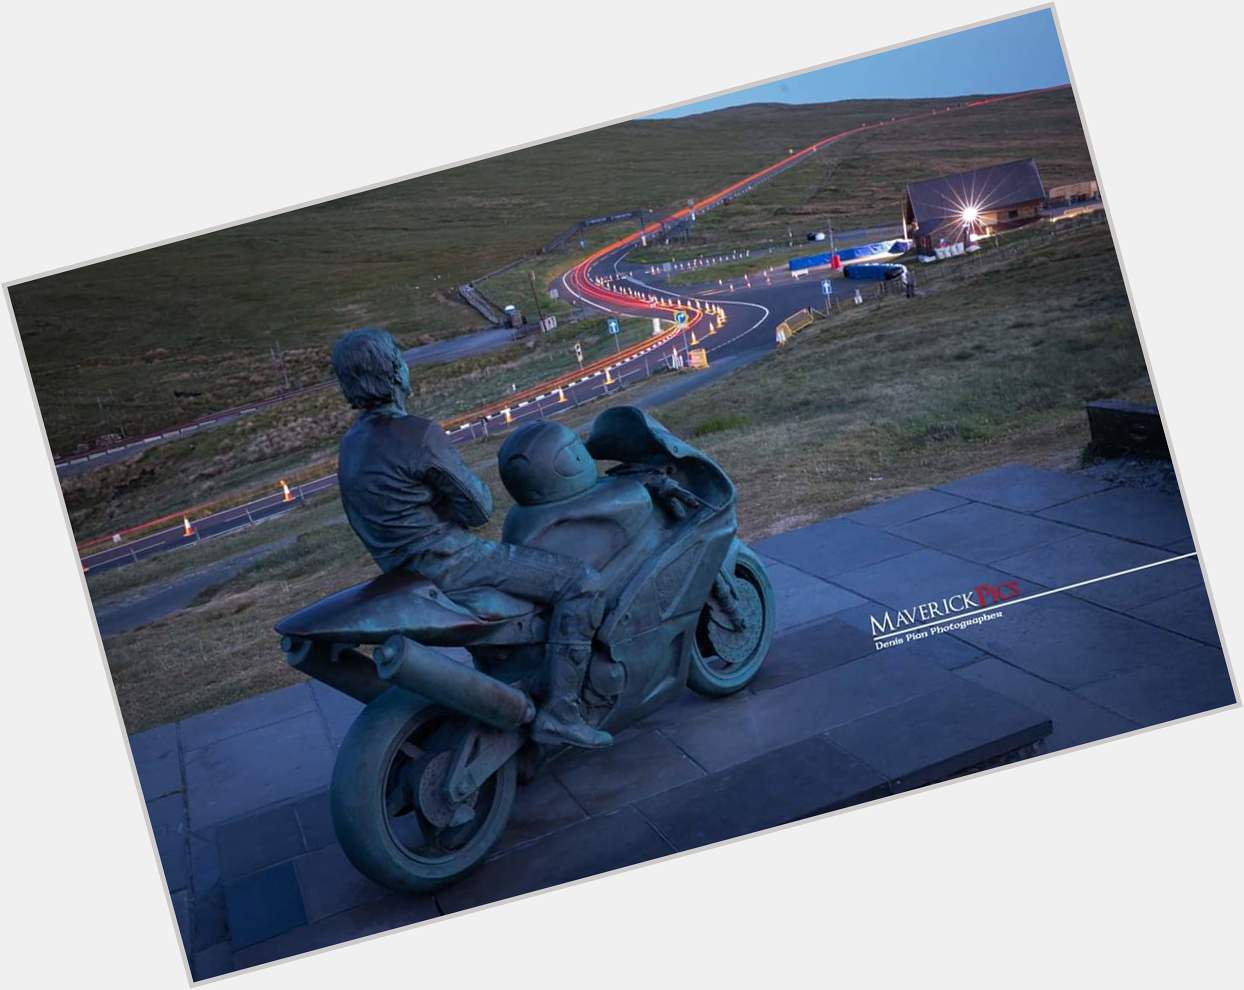 Happy BDay Joey Dunlop 
King of the Mountain Yer Maun

On the top of the Snaefell!
Joey Dunlop Memorial 